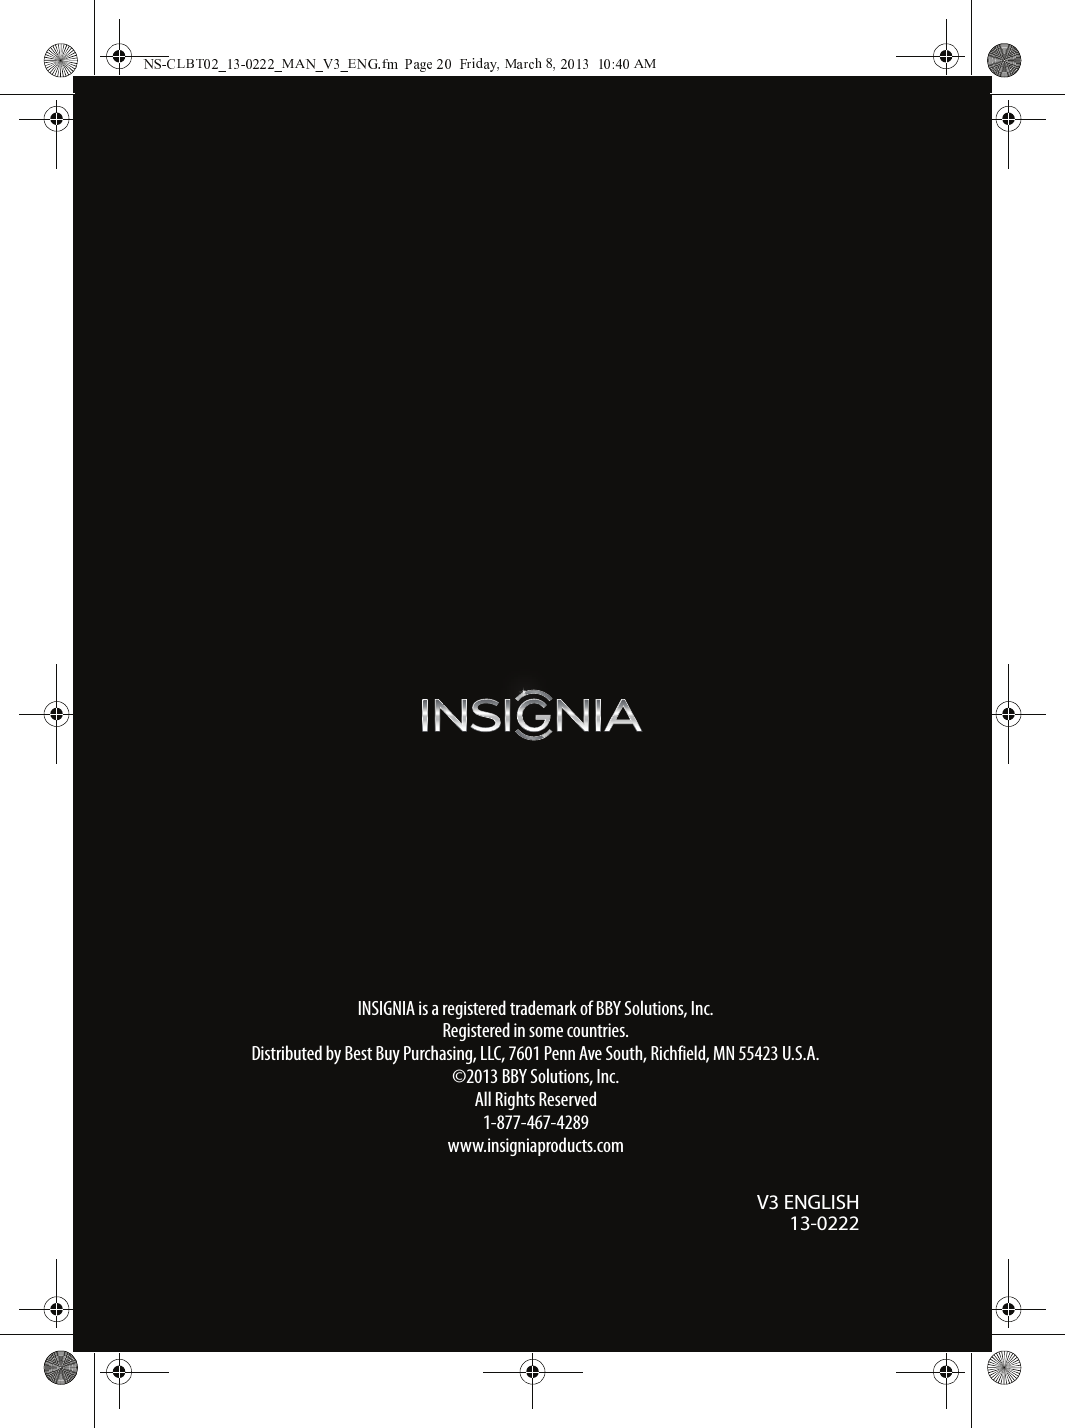 INSIGNIA is a registered trademark of BBY Solutions, Inc. Registered in some countries.Distributed by Best Buy Purchasing, LLC, 7601 Penn Ave South, Richfield, MN 55423 U.S.A.©2013 BBY Solutions, Inc.All Rights Reserved1-877-467-4289www.insigniaproducts.comV3 ENGLISH13-0222